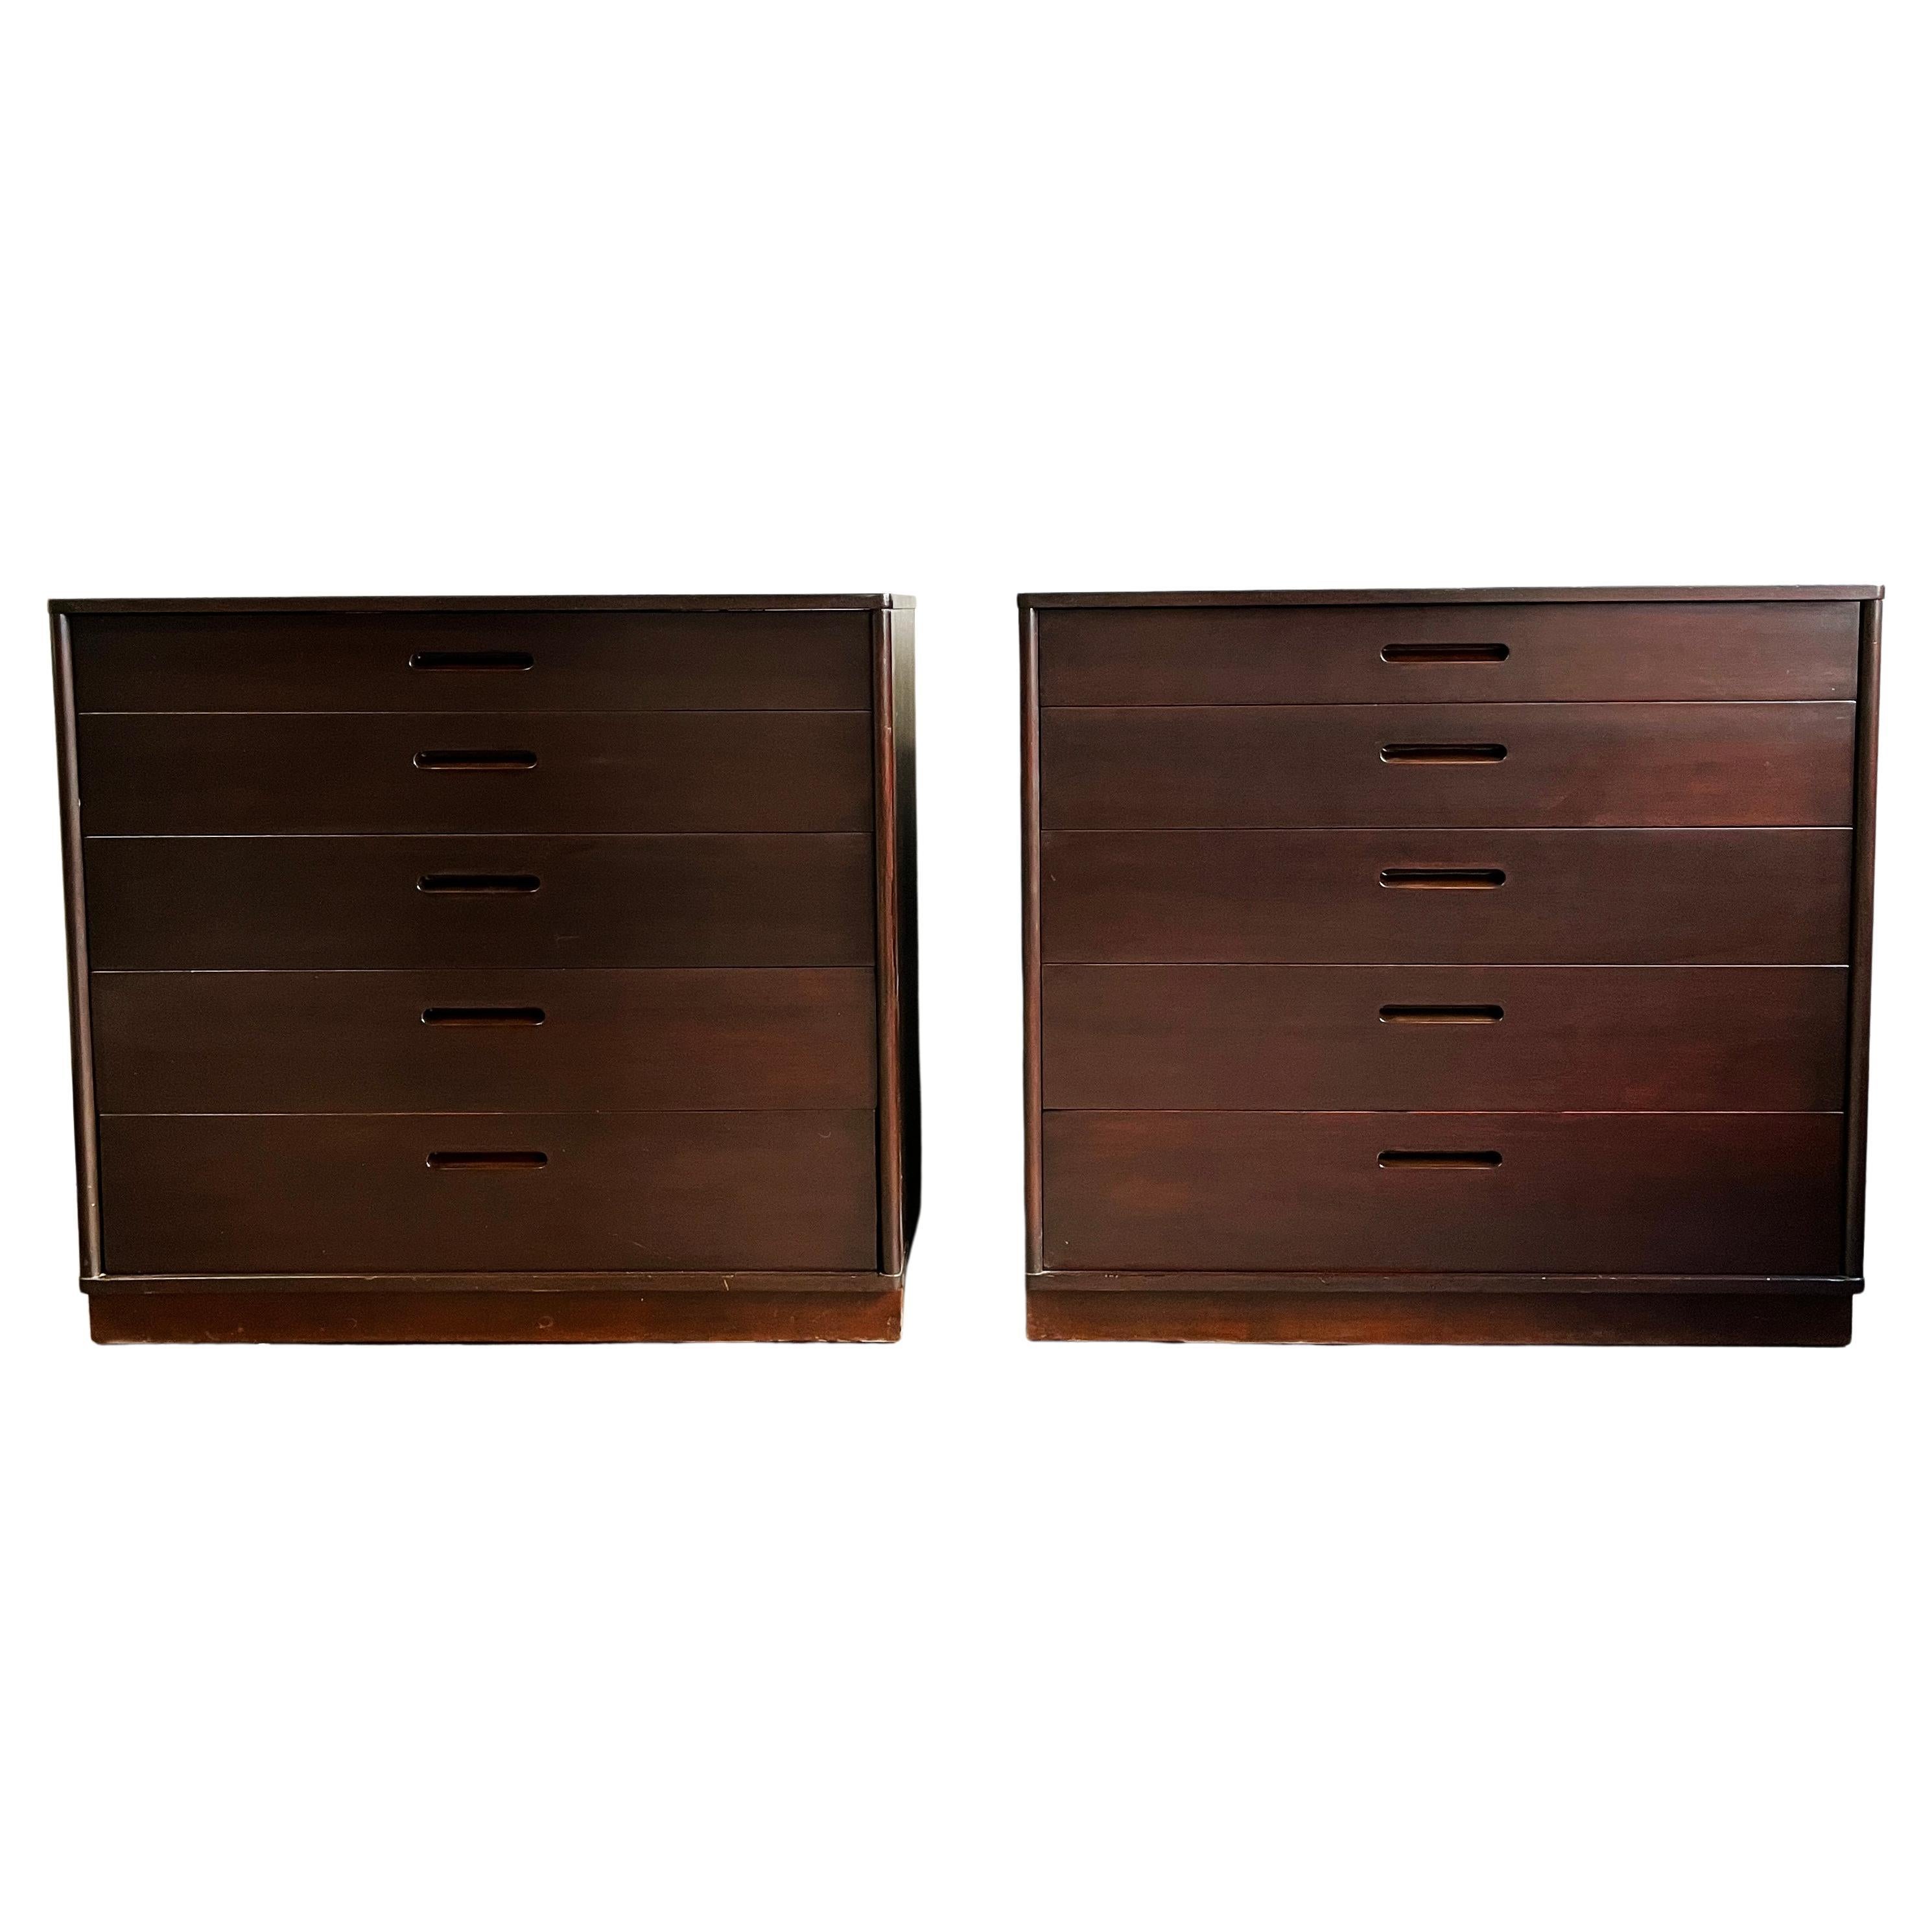 Mid-Century Modern Midcentury Chest of Drawers by Edward Wormley for Dunbar  (Pair)